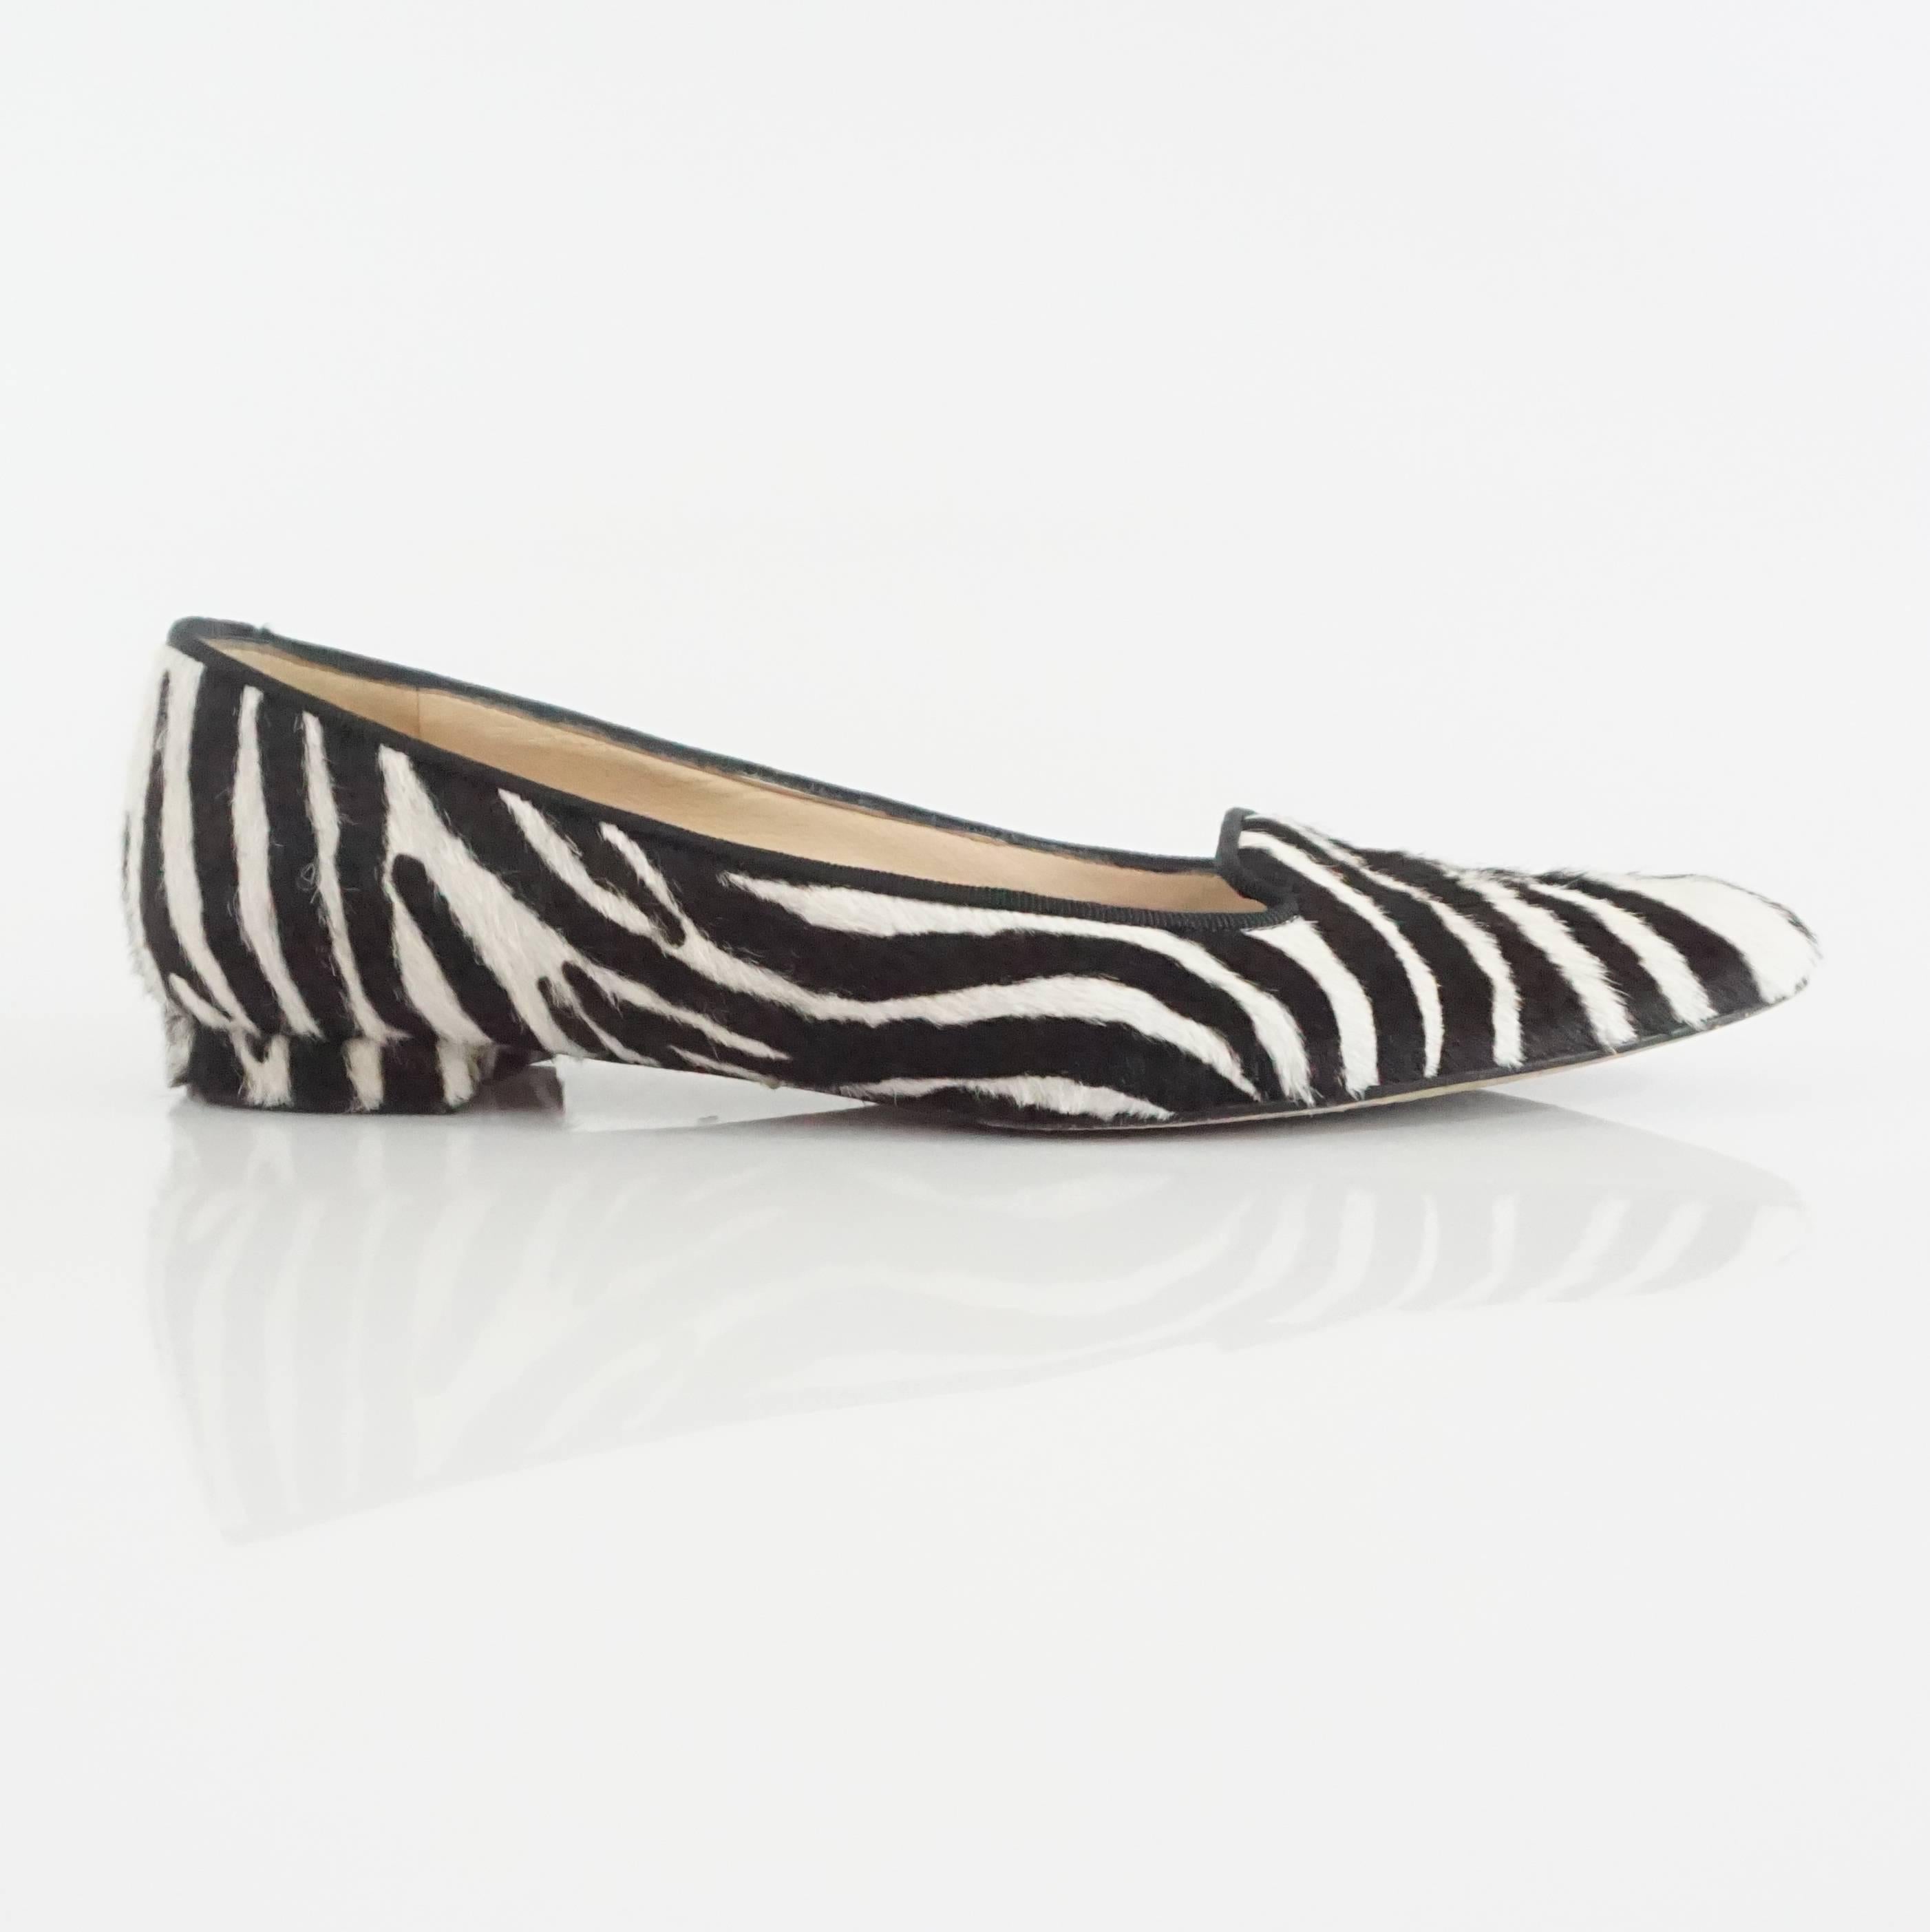 These Manolo Blahnik flats are black and white and are made of pony hair. They have a slightly pointed toe and a thin black trim. The flats are in excellent condition with some bottom wear. 